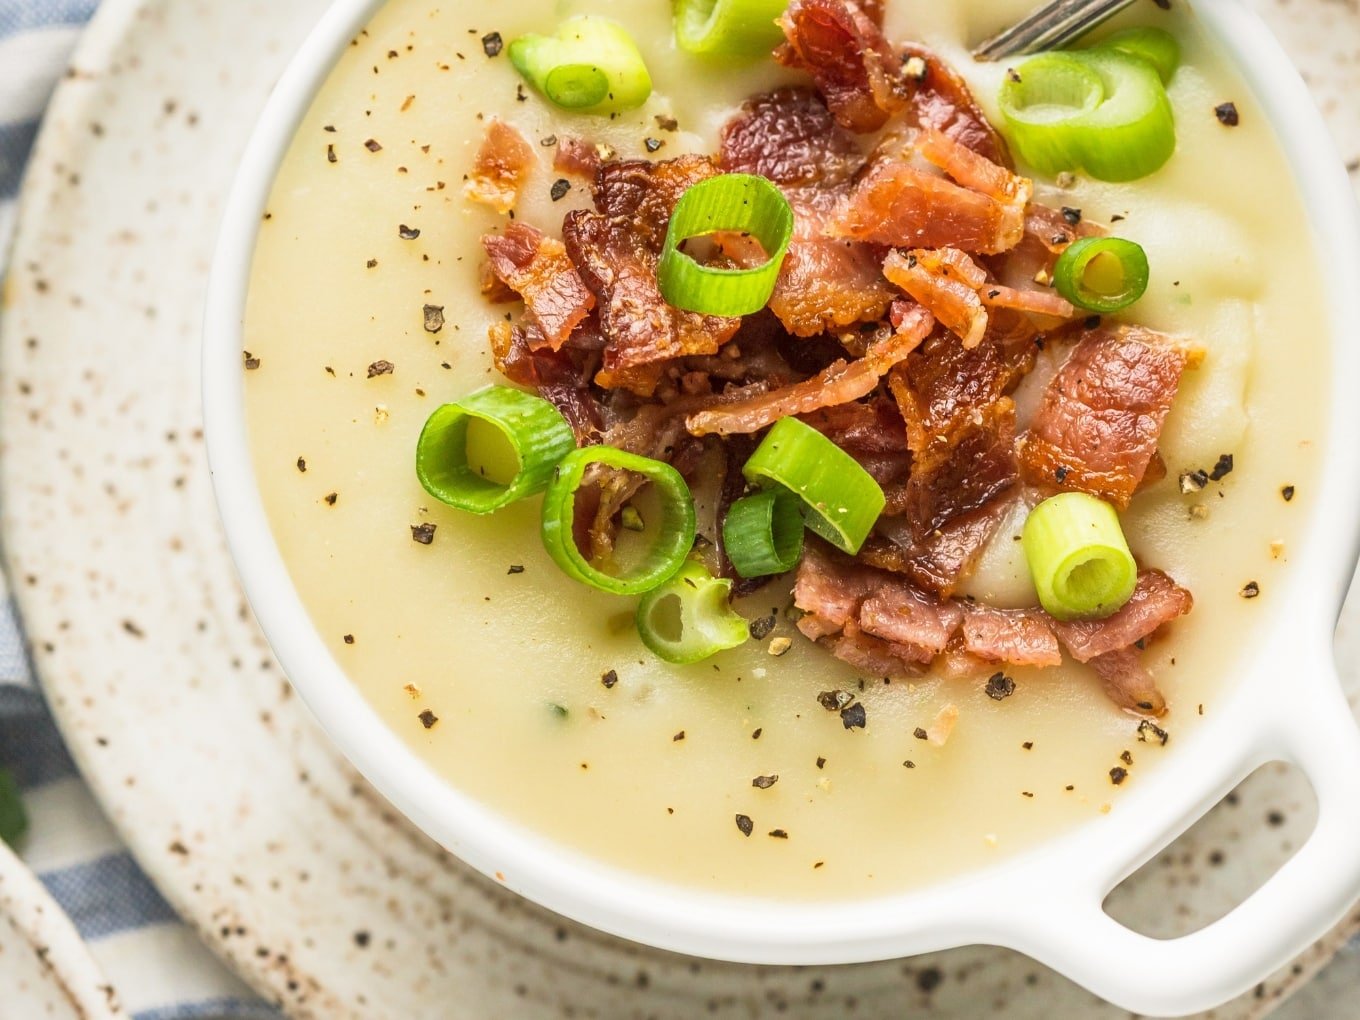 https://thewholecook.com/wp-content/uploads/2017/09/30-Minute-Dairy-Free-Potato-Soup-by-The-Whole-Cook-horizontal1-1.jpg